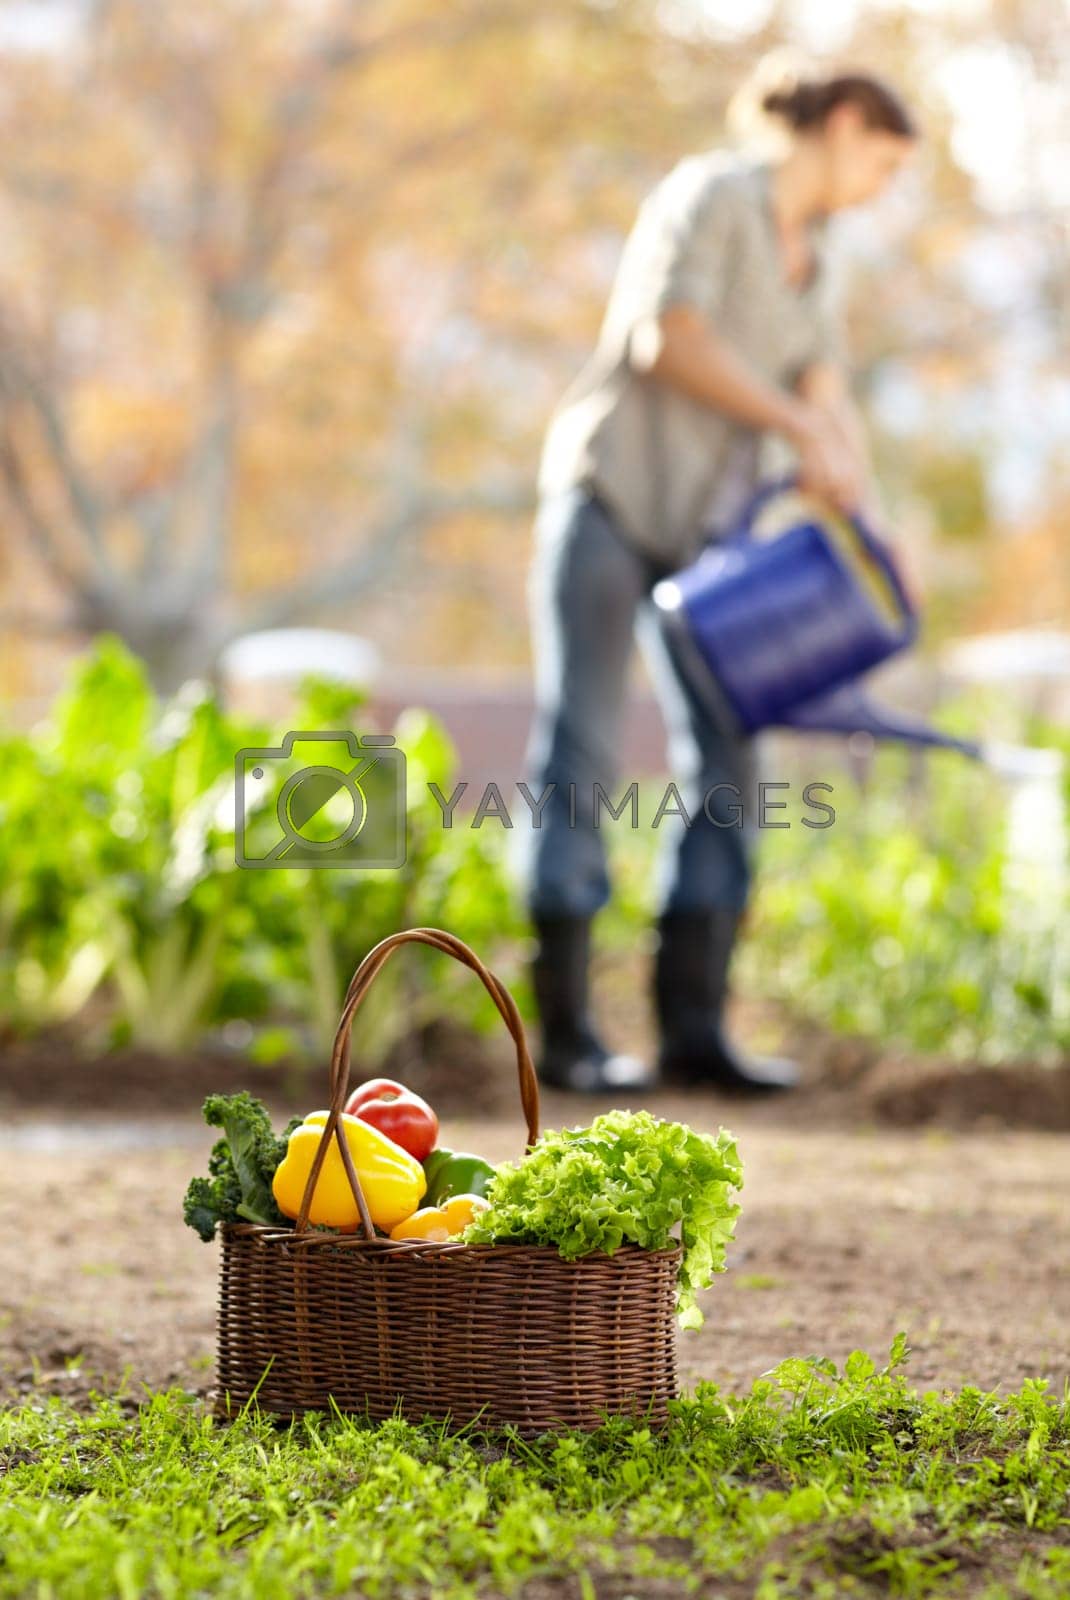 Royalty free image of Water, vegetables or farmer gardening for agriculture or sustainability for harvest or agro business. Blur, farming or woman working on fresh natural produce for wellness, organic growth or nutrition by YuriArcurs